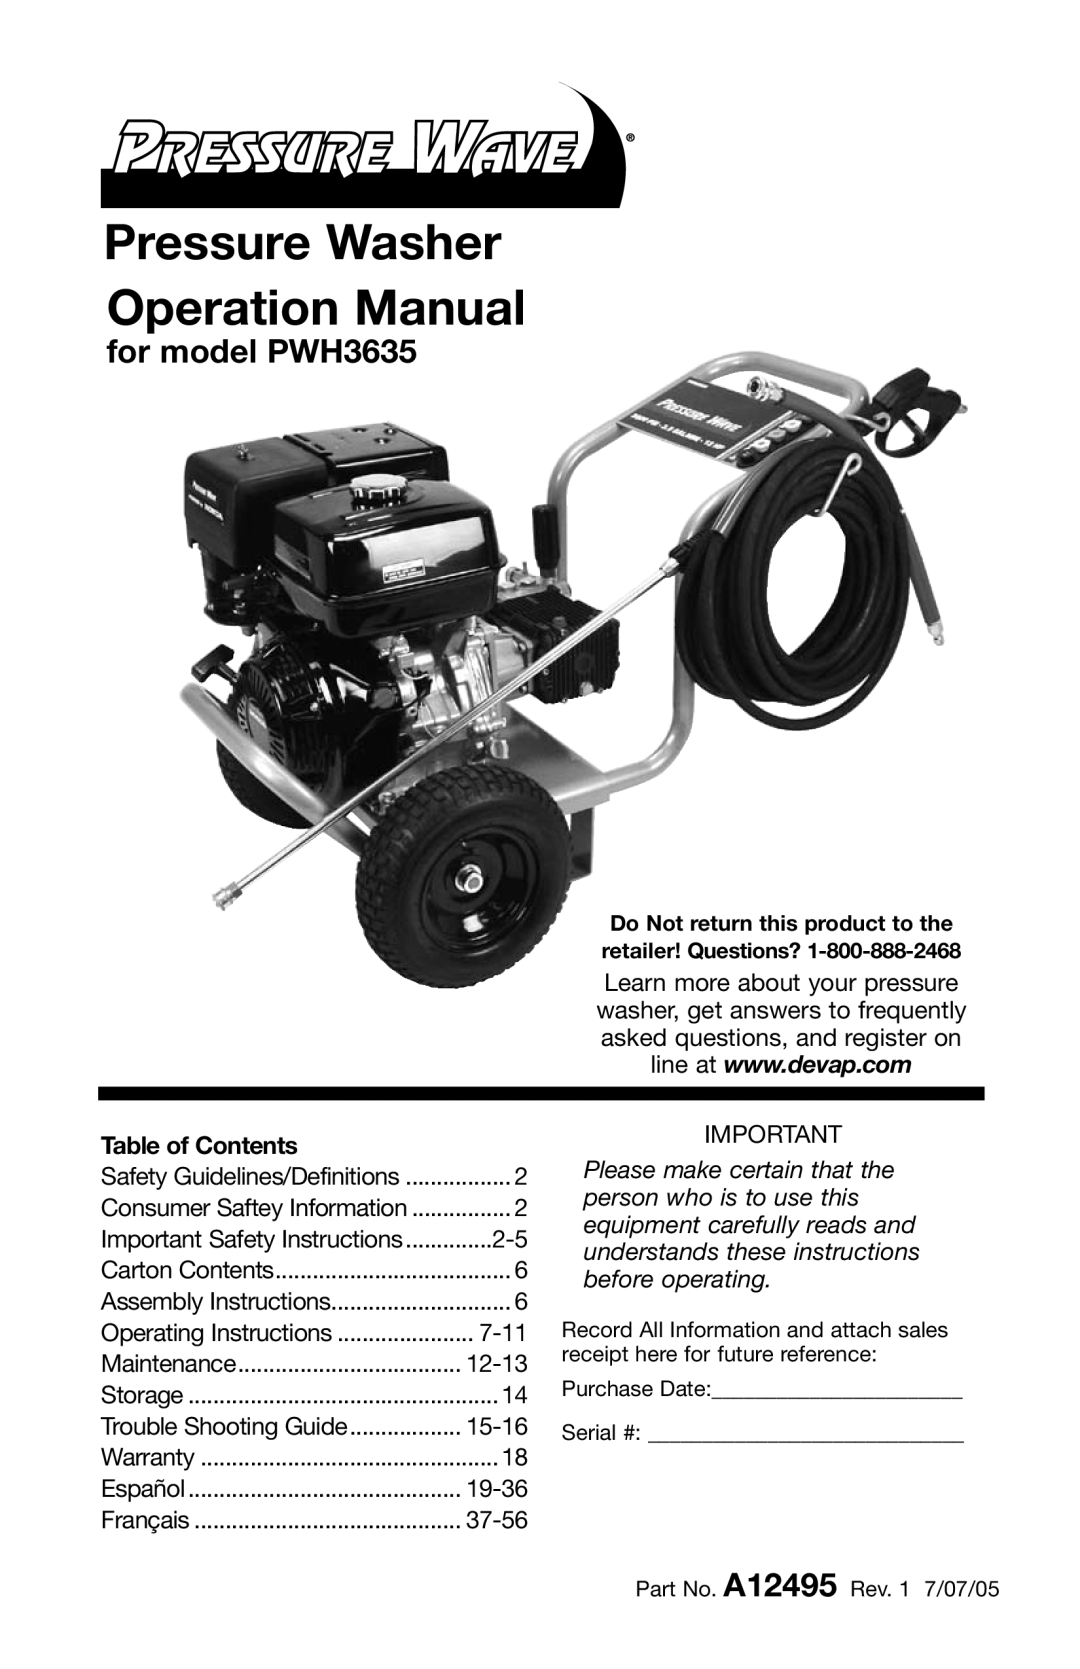 DeVillbiss Air Power Company A12495 operation manual Pressure Washer Operation Manual, for model PWH3635 